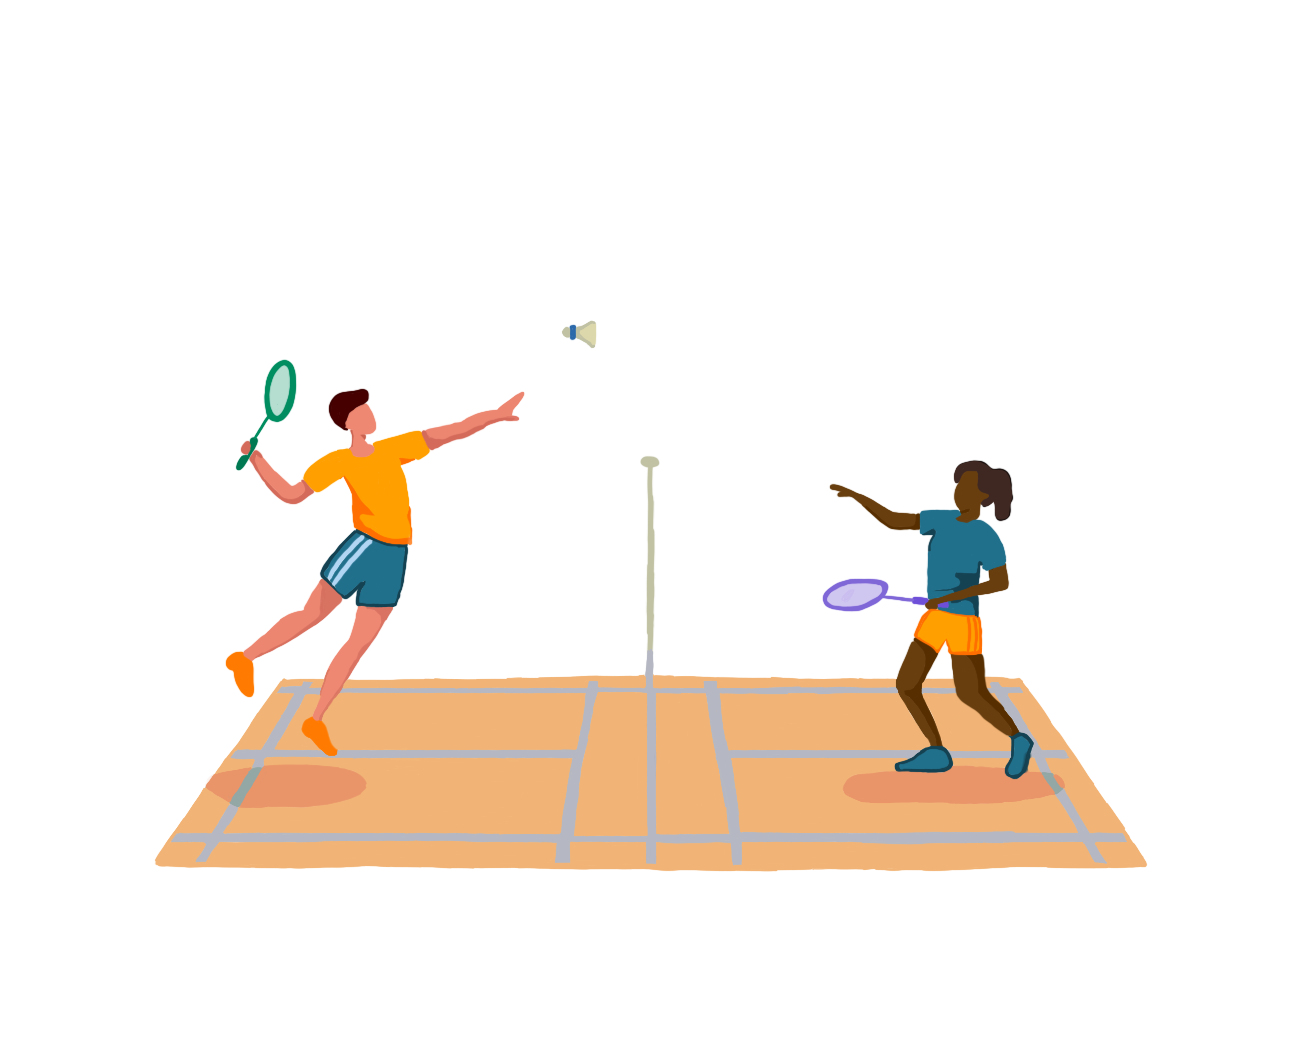 On Sept. 9, 12 ETHS badminton players faced off in the gym of Stevenson High School.